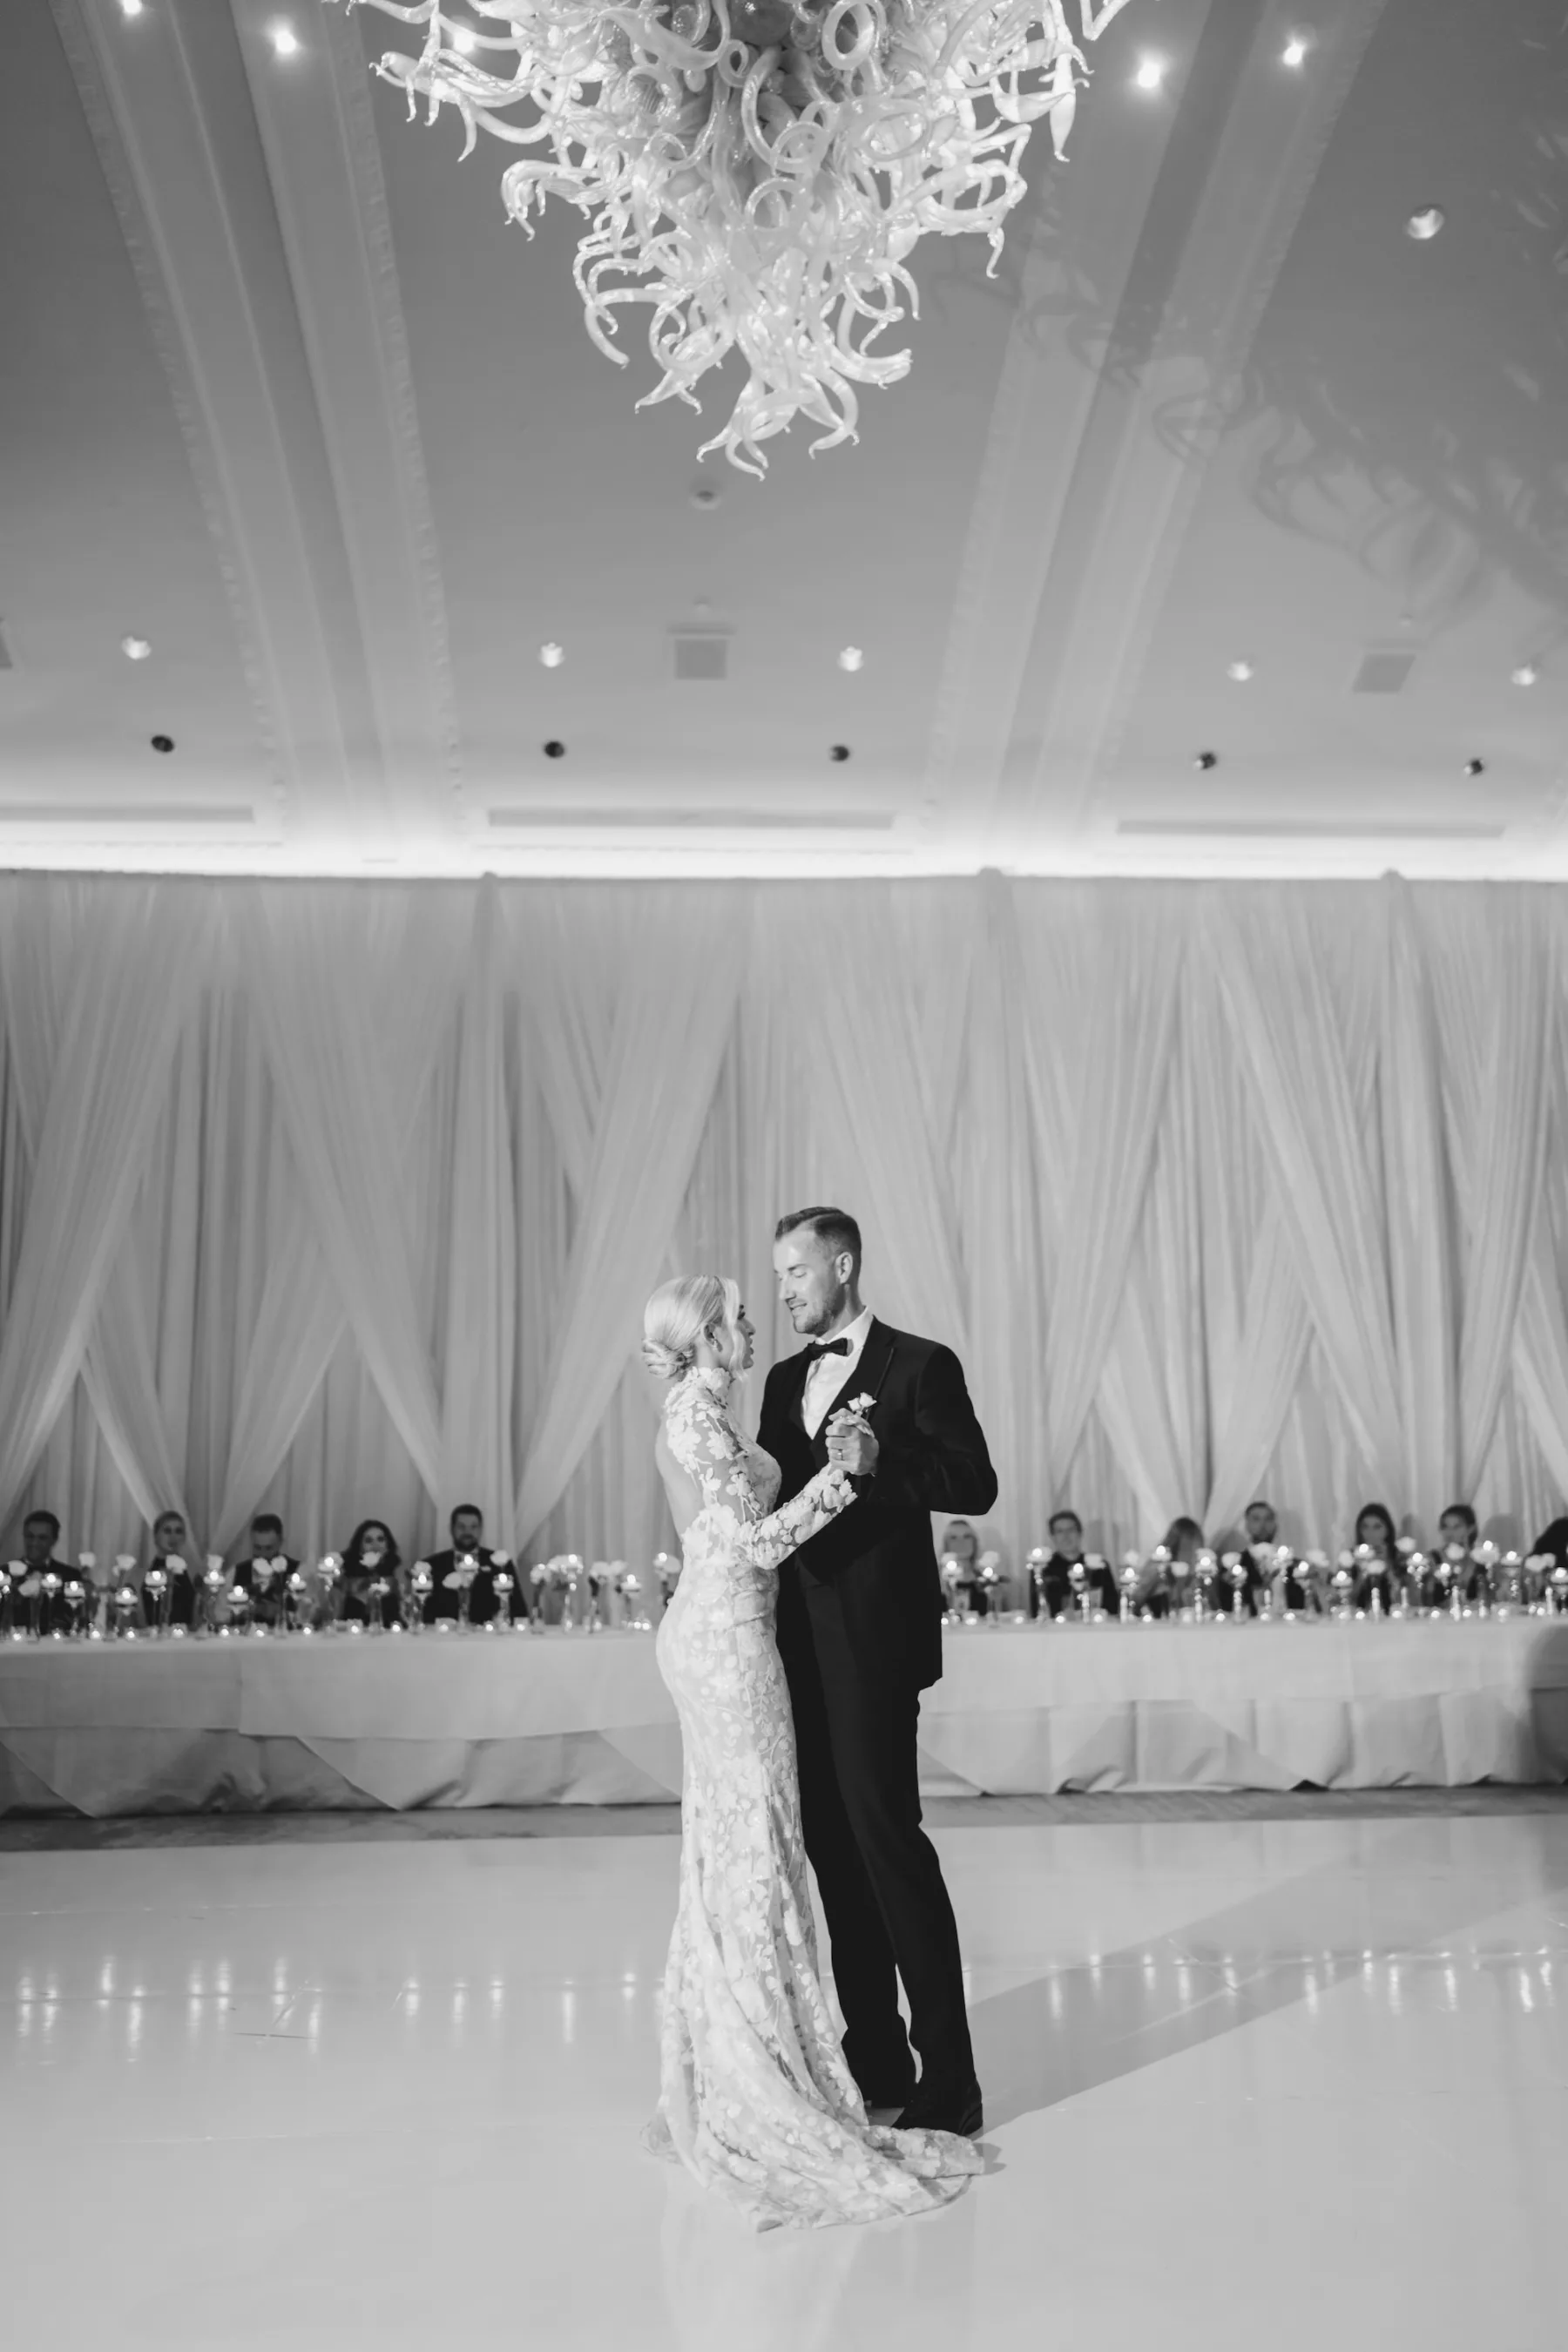 Bride and Groom First Dance Black and White Wedding Portrait | St Pete Historic Hotel Venue The Vinoy | DJ Grant Hemond and Associates